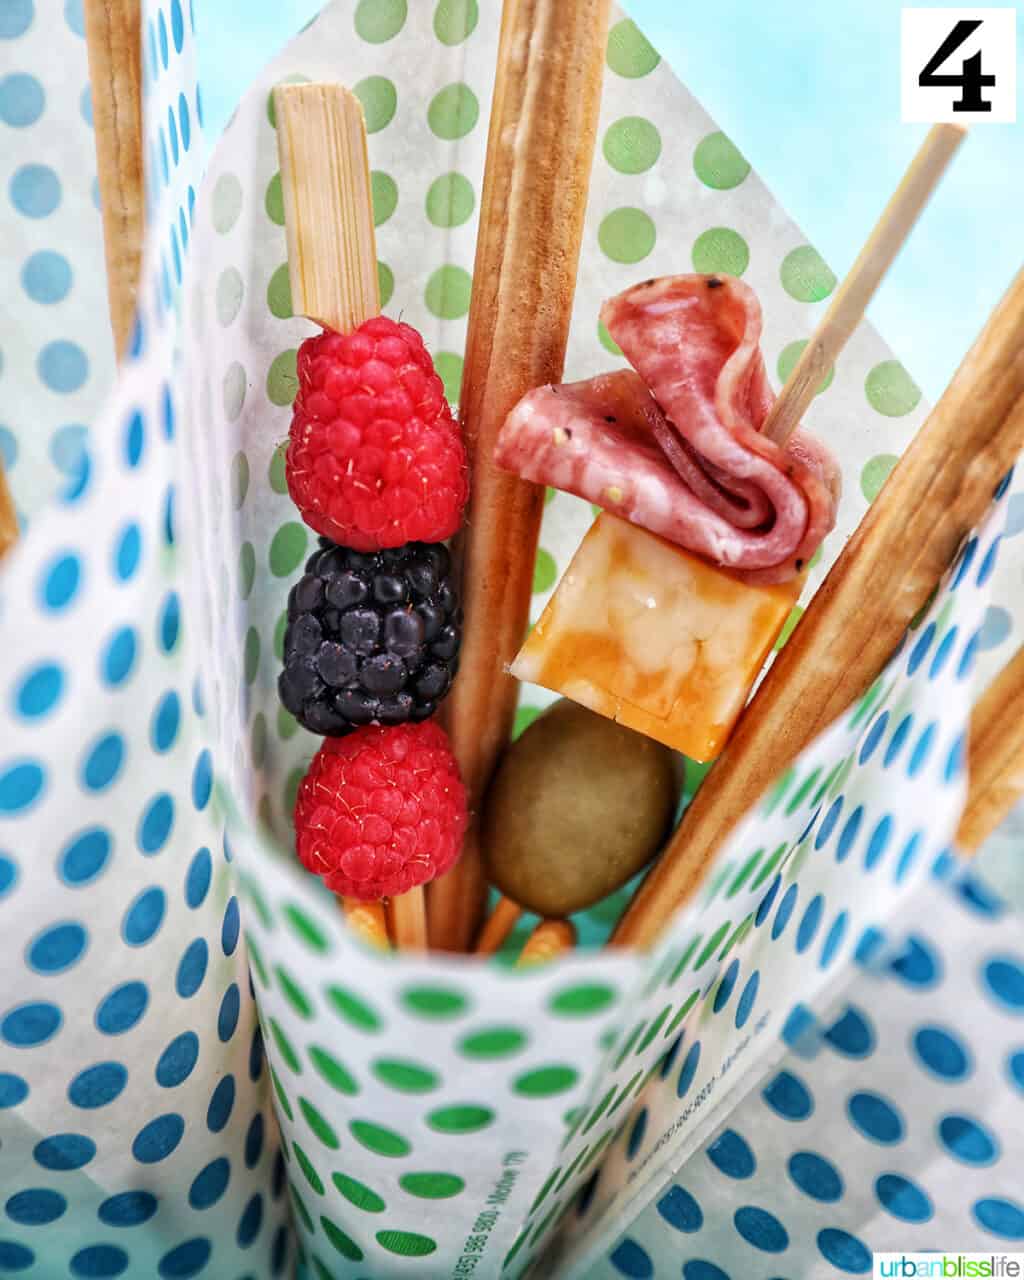 Charcuterie cones with fruit, cheeses, breadsticks, nuts, chocolate, herbs in paper cones.